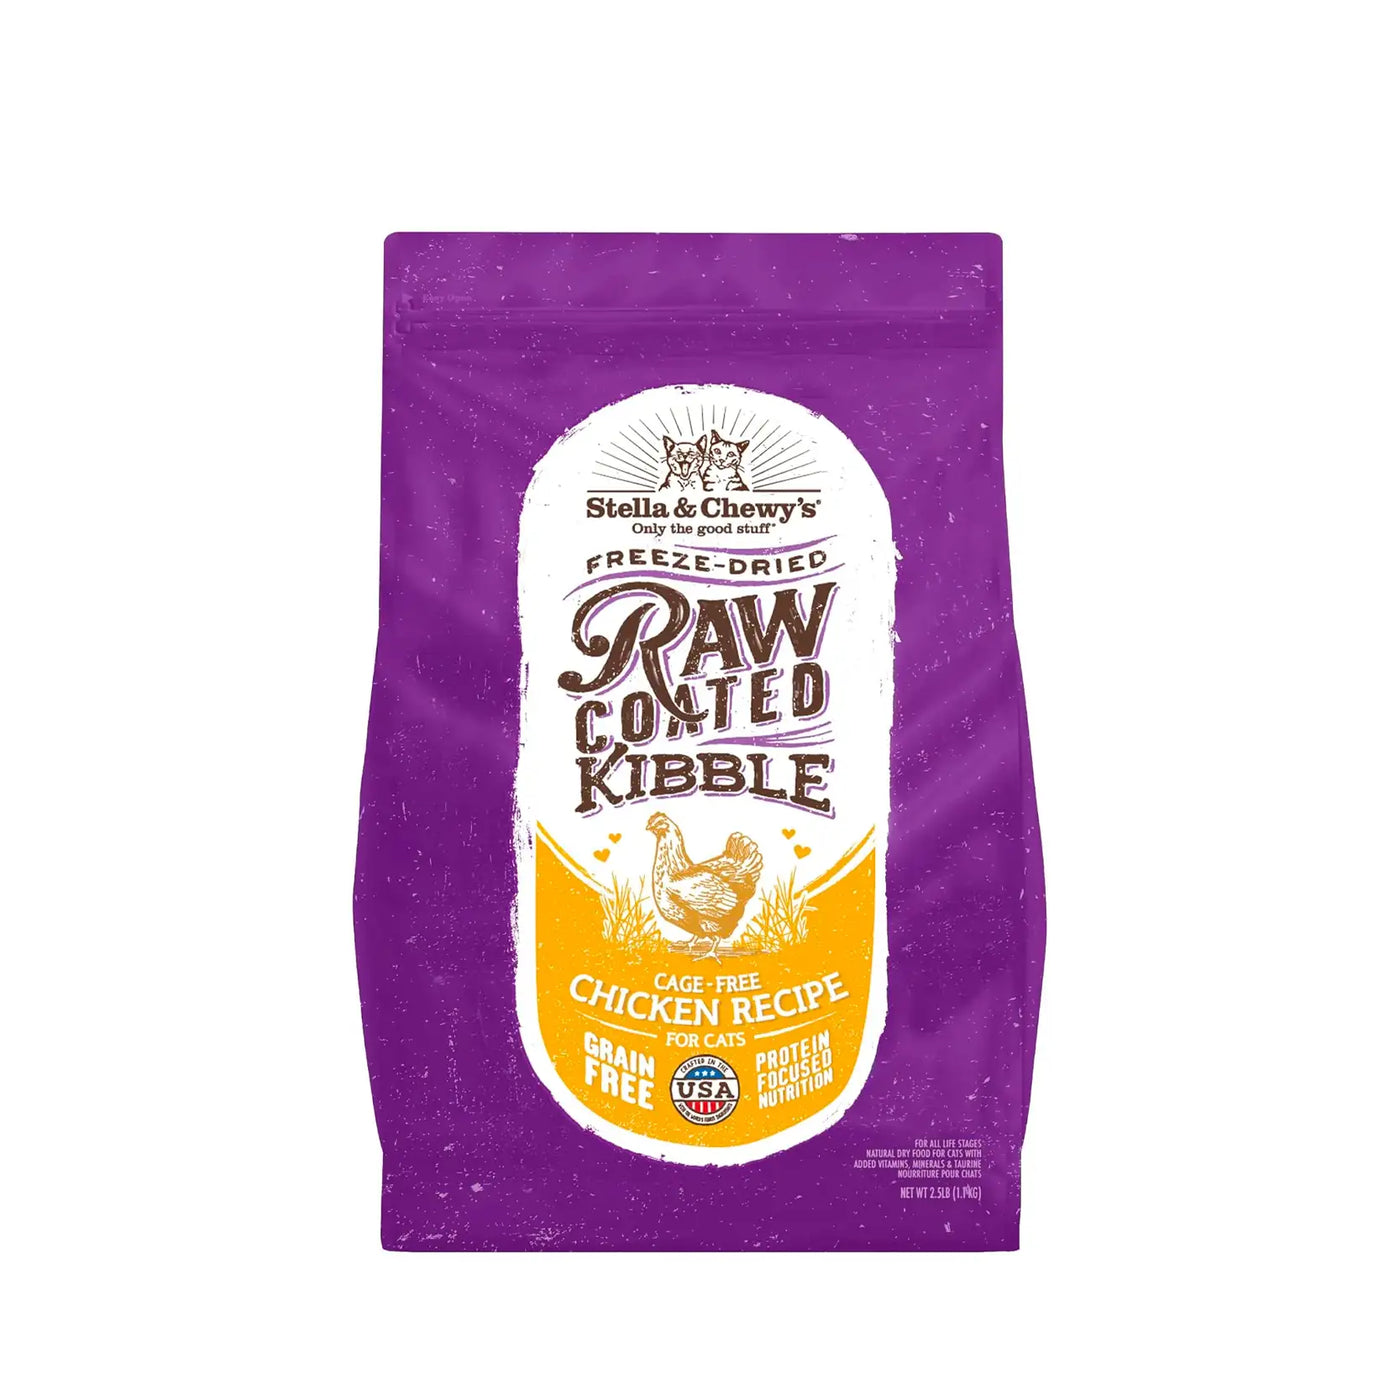 Stella & Chewy's - Freeze Dried Raw Coated Kibble for Cats (Cage-Free Chicken Recipe)